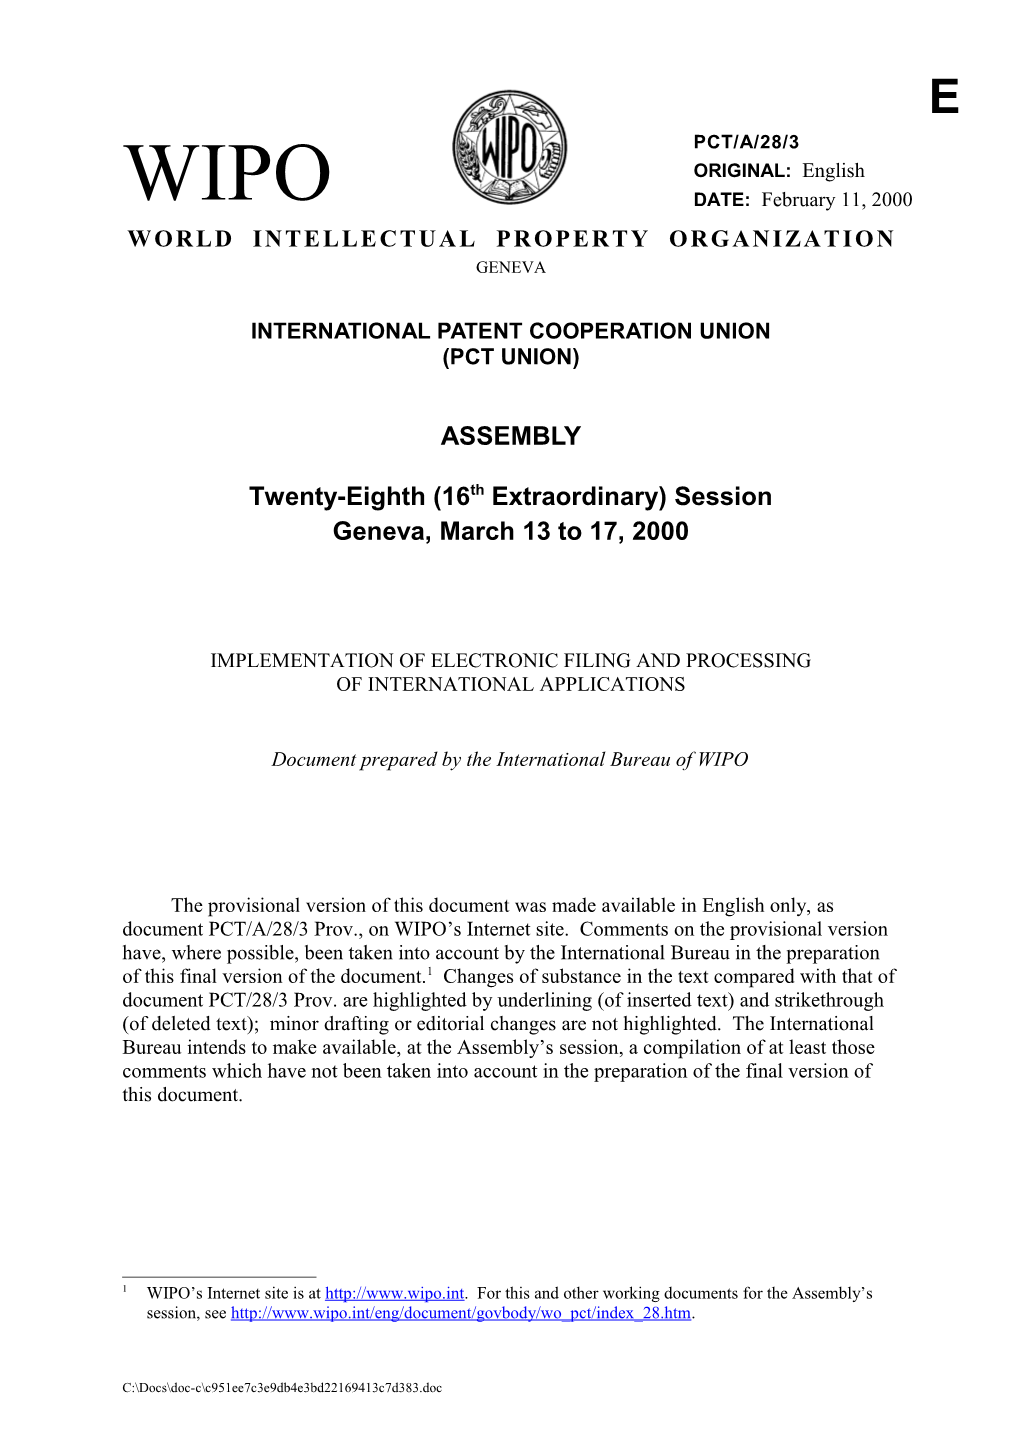 PCT/A/28/3: Implementation of Electronic Filing and Processing of International Applications